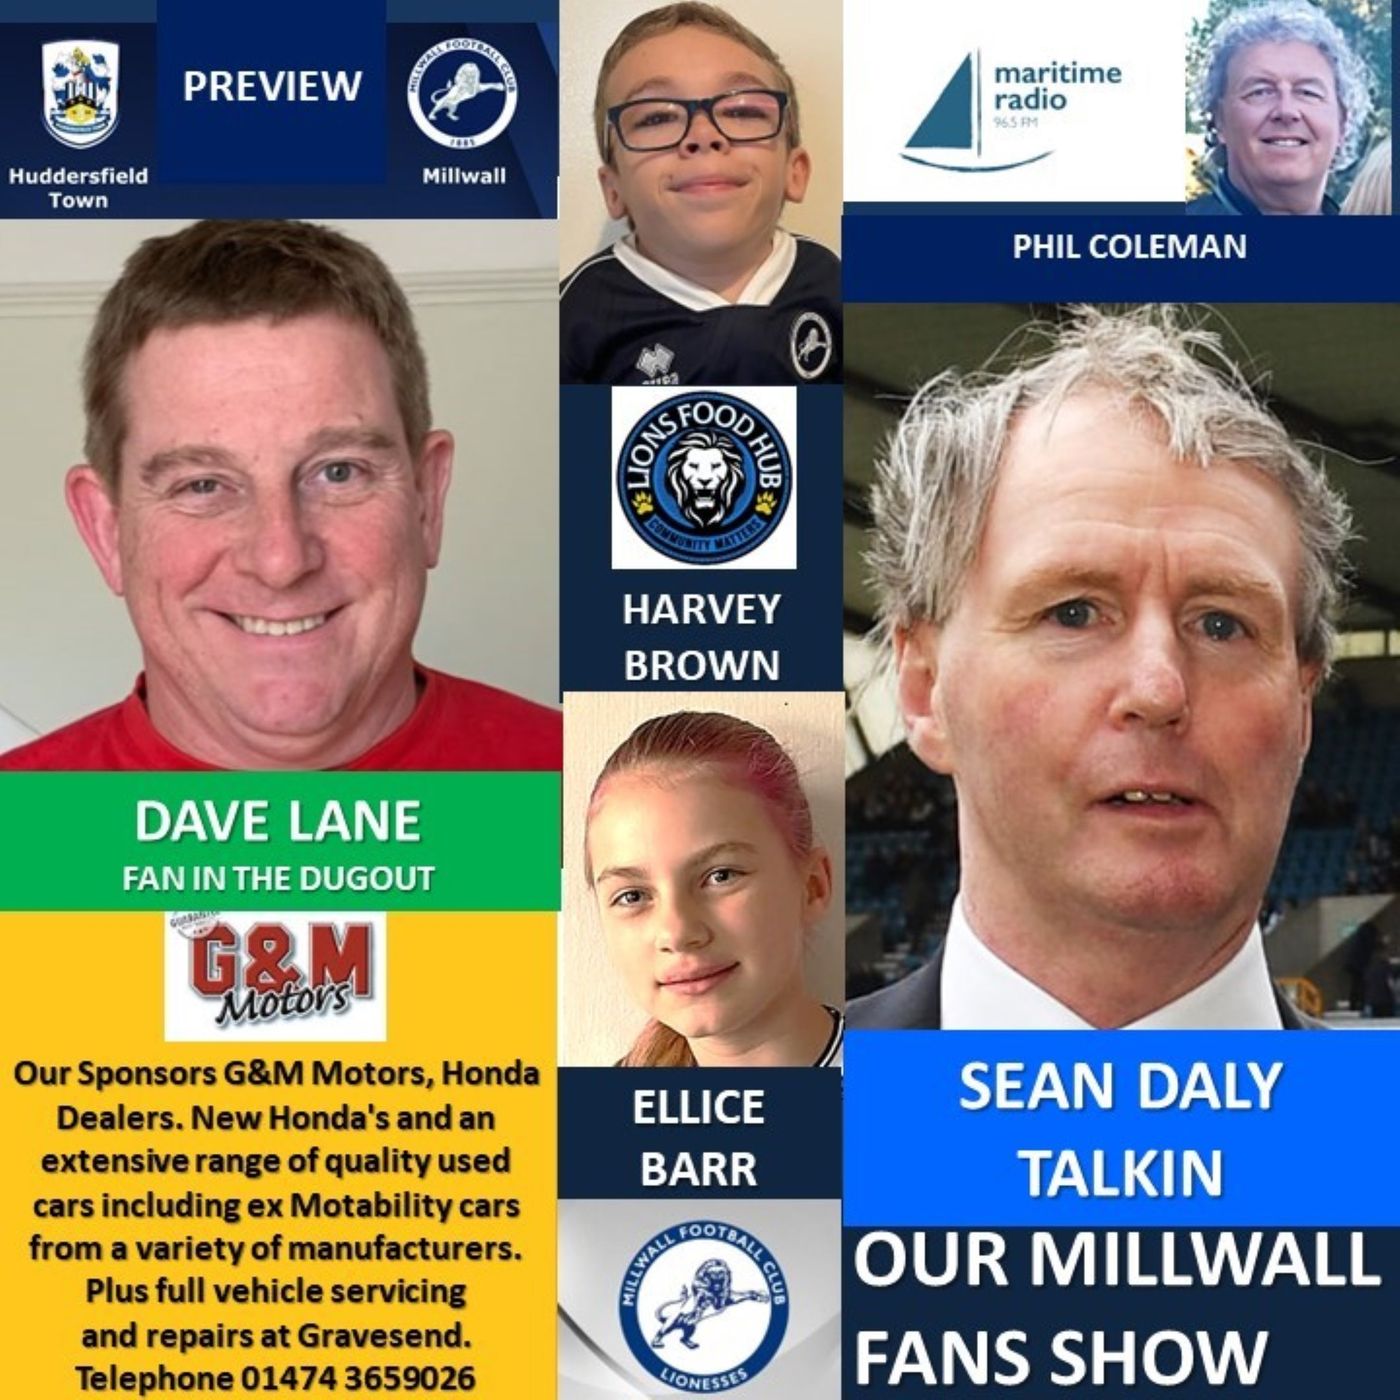 Our Millwall Fans Show - Sponsored by G&M Motors, Gravesend - 050424